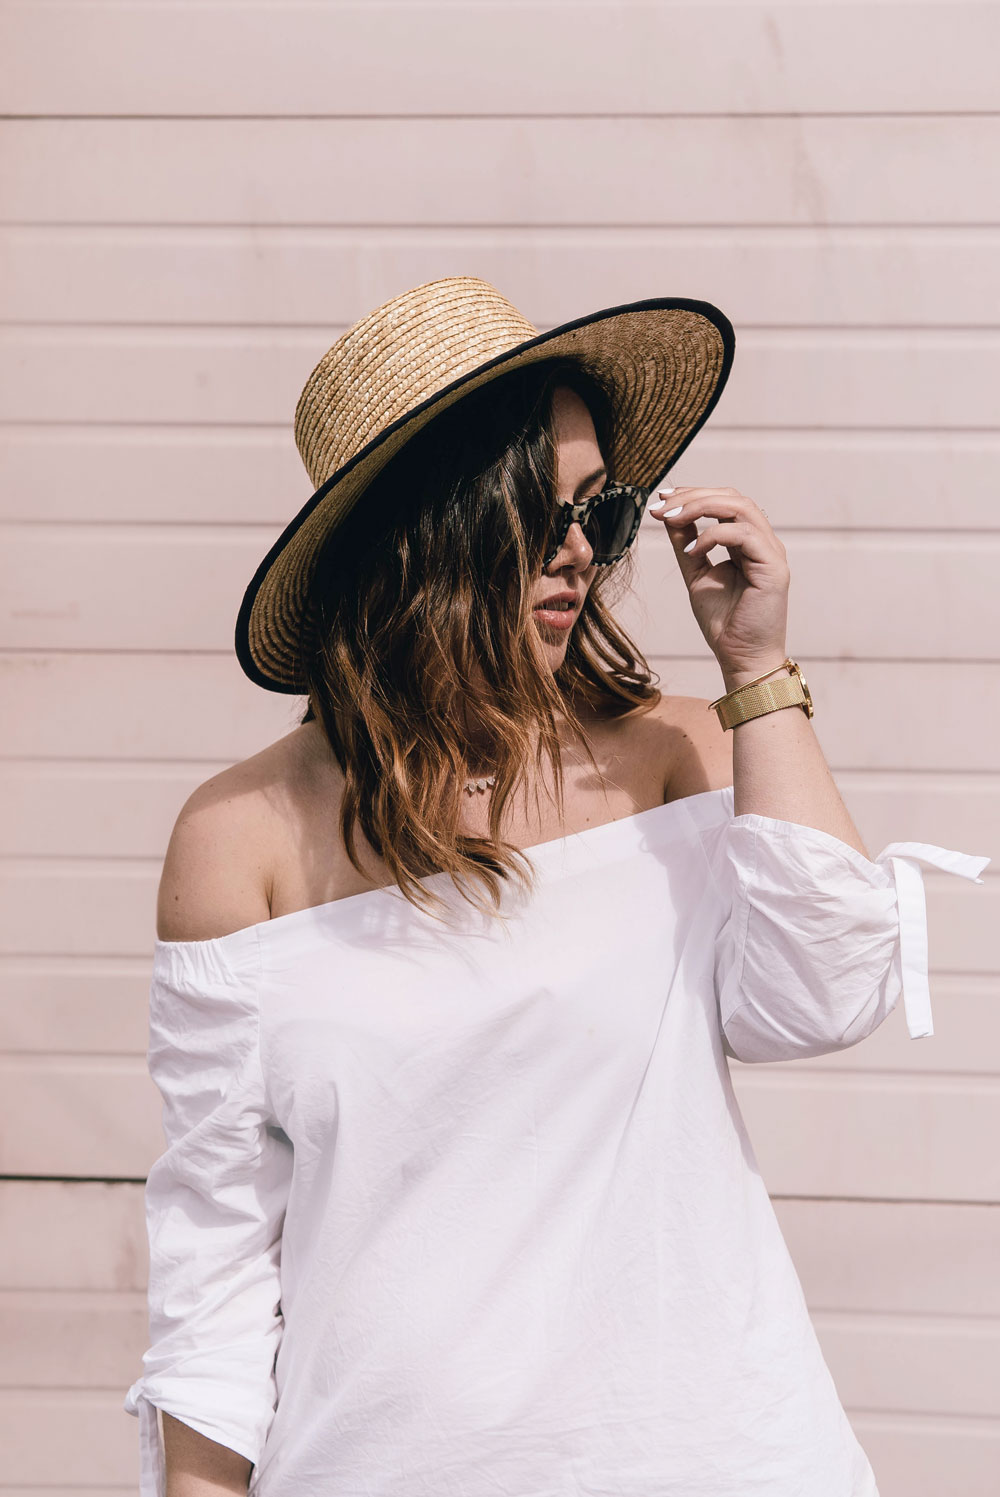 How to style converse sneakers, how to wear converse, how to wear sneakers, how to wear a boat hat, summer transition outfit ideas in bailey nelson sunglasses, bailey nelson tortoise sunglasses, aritzia off the shoulder top by To Vogue or Bust